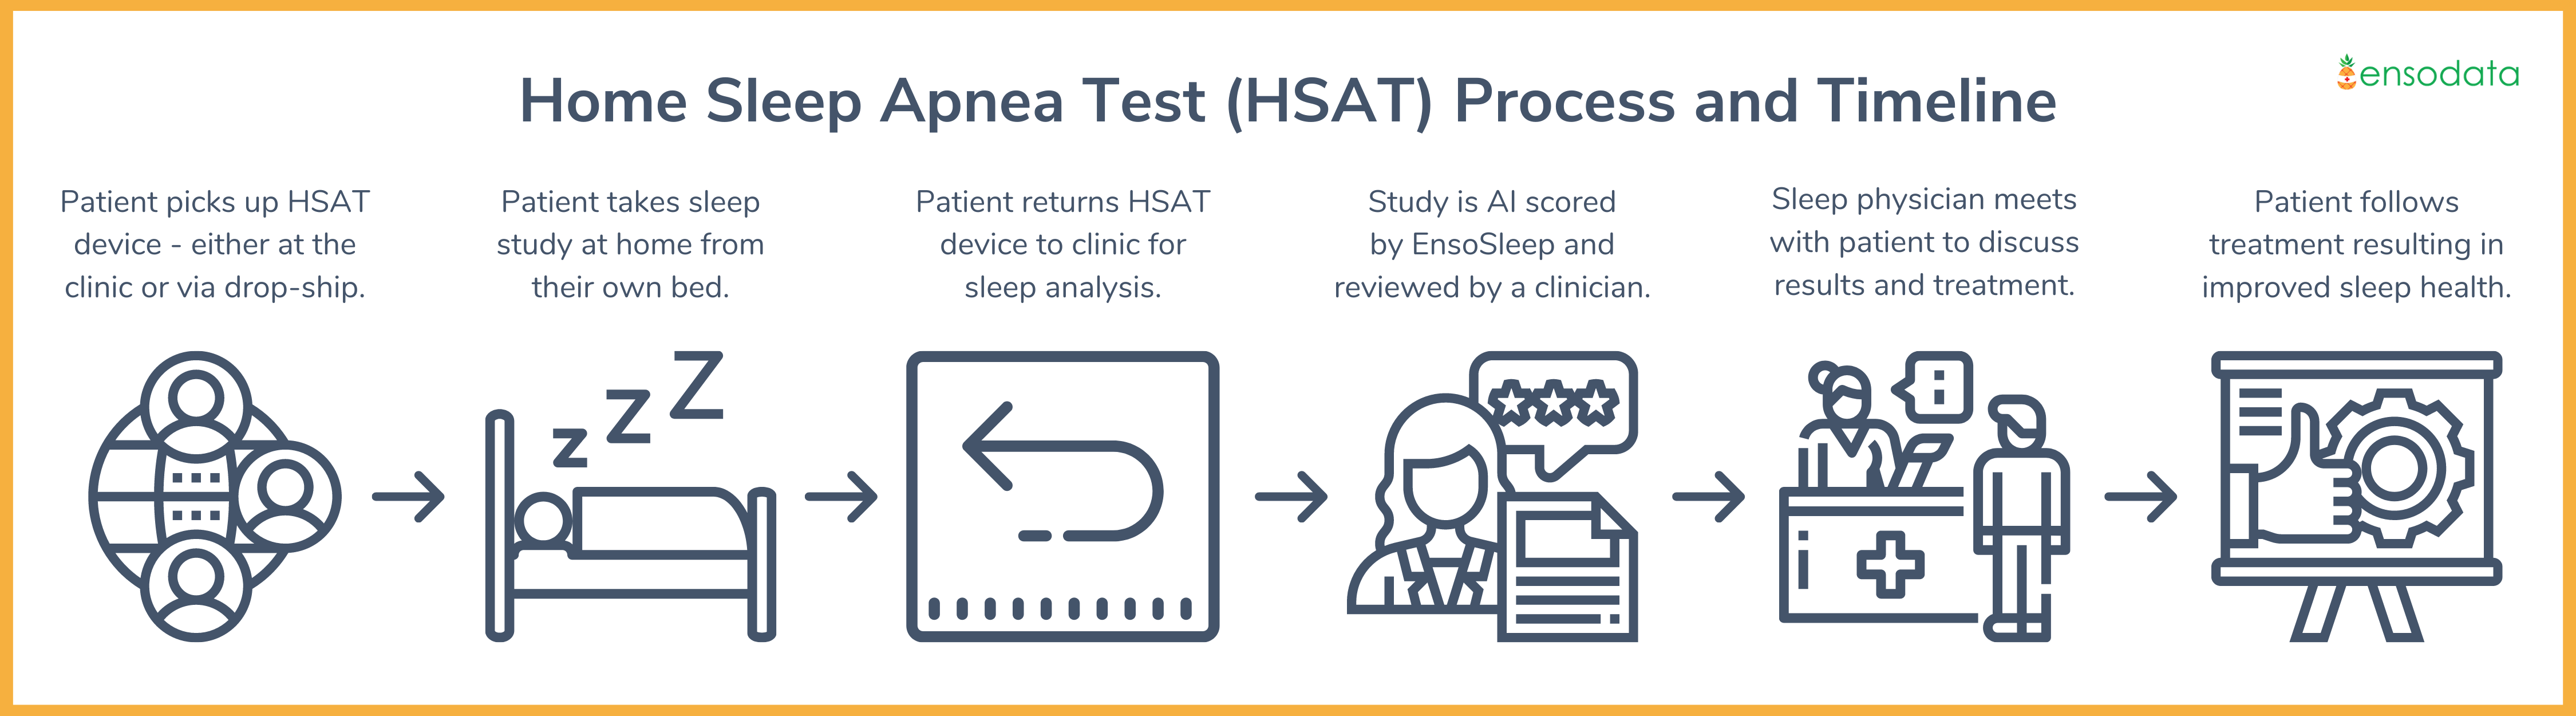 Home Sleep Apnea Test (HSAT) Process and Timeline for Sleep Center's to Help Reduce No Shows with AI Scoring for HSATs